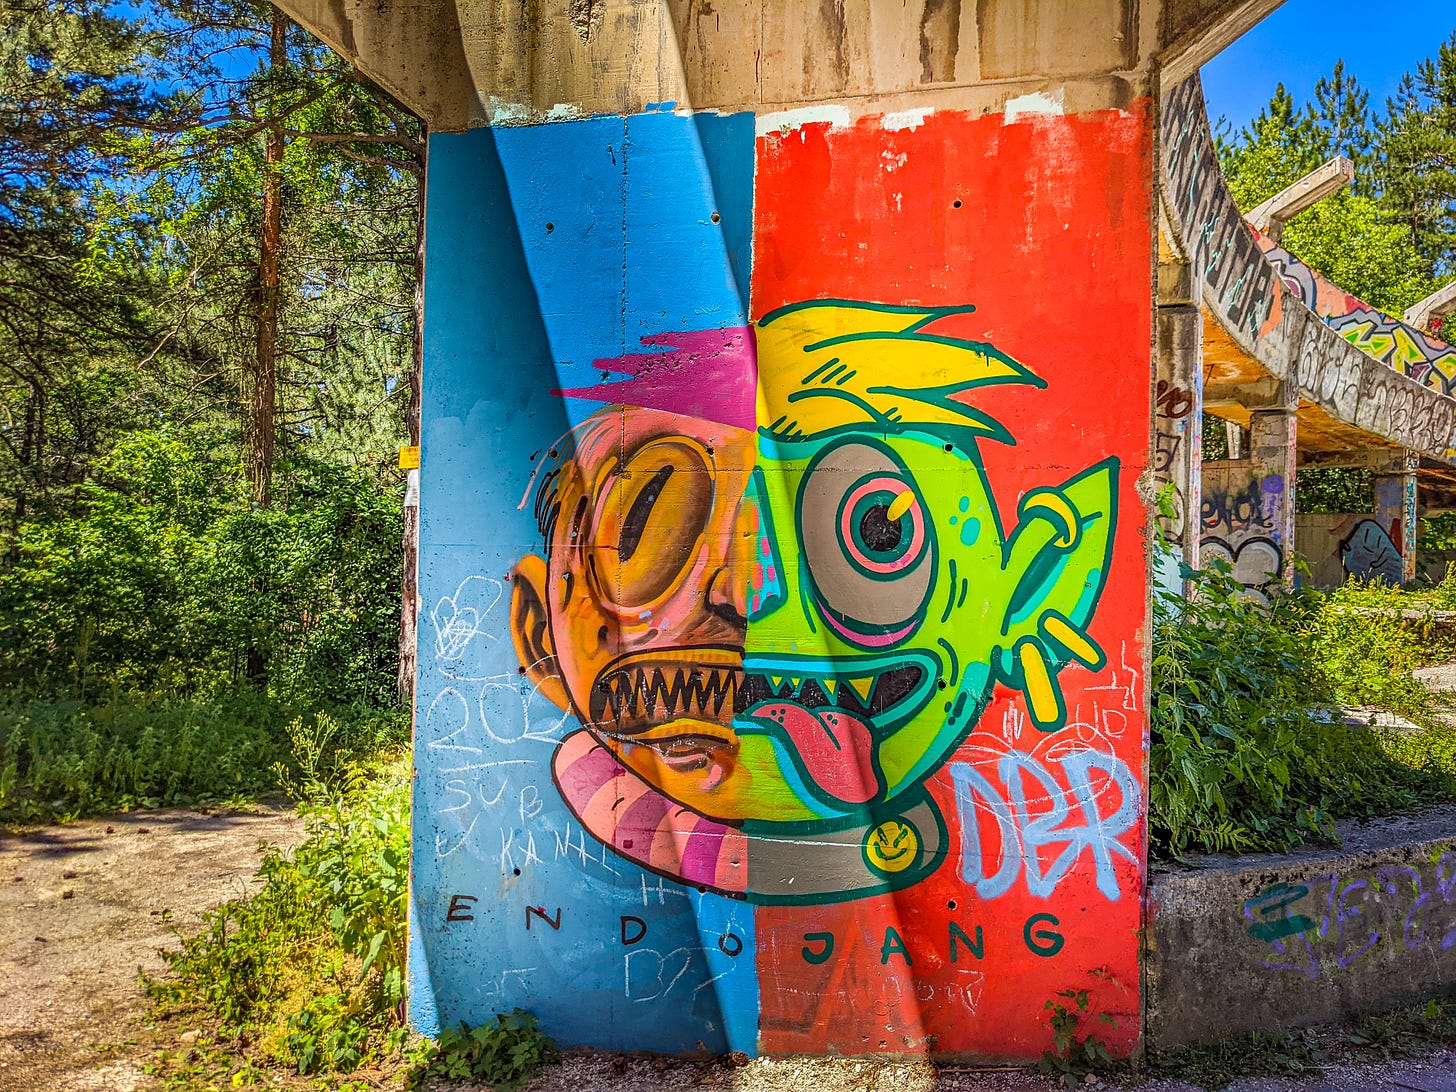 Graffiti painted part of the bobsleigh run. It shows a comical face with bug eyes, sharp teeth and tongue sticking out, all painted in bright colors. 